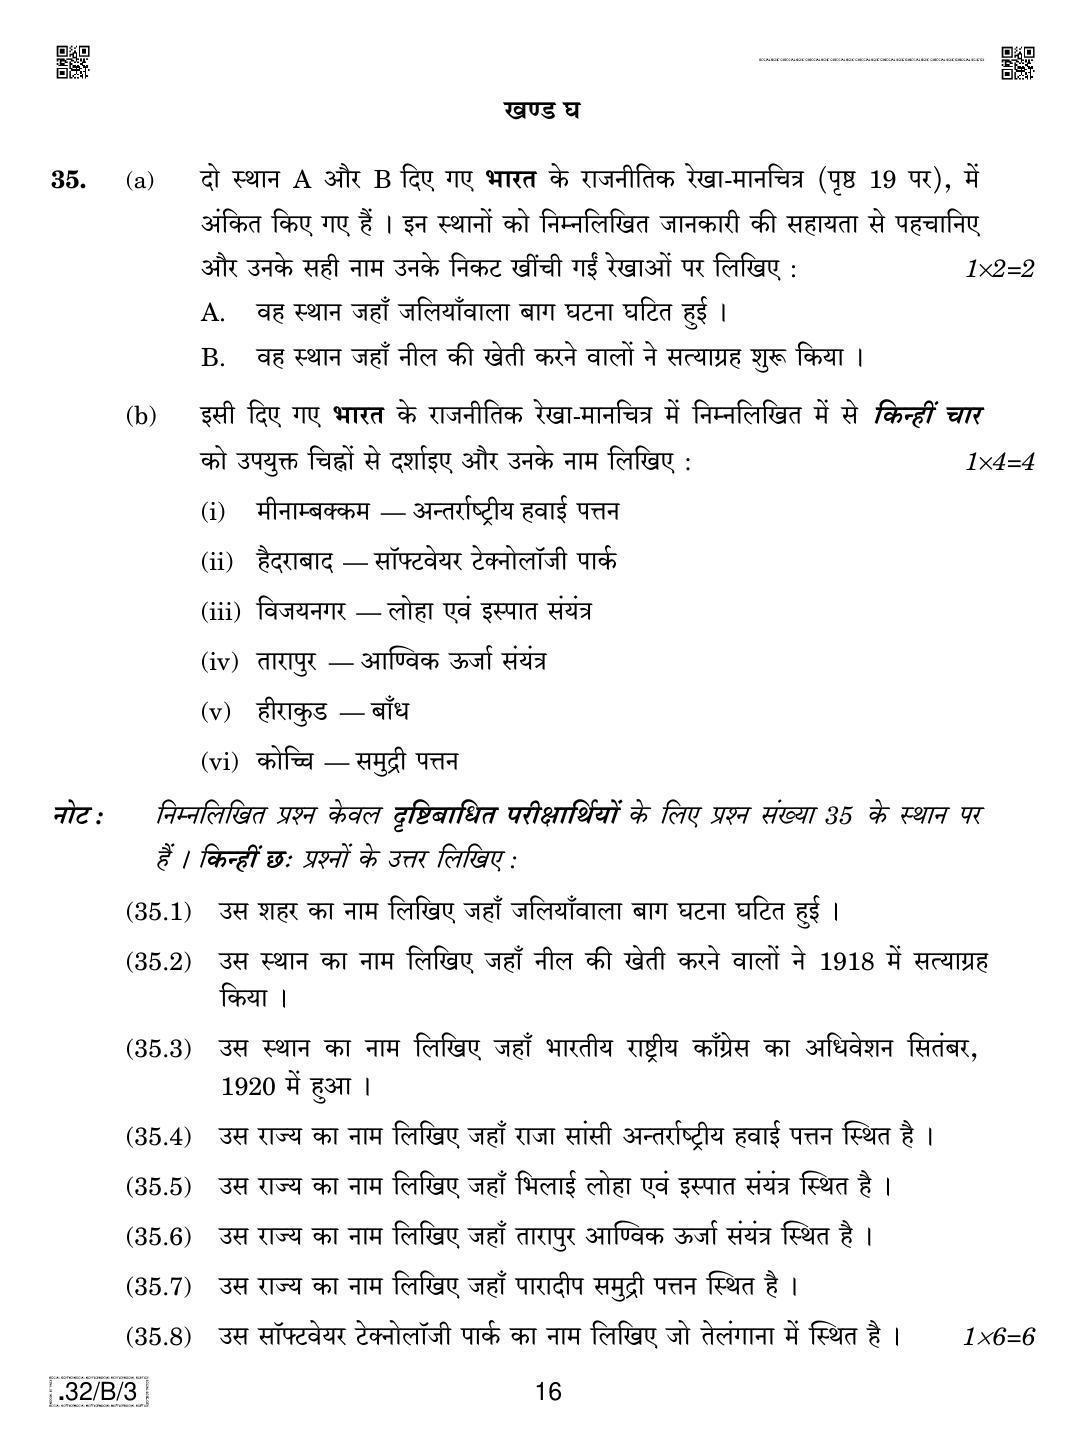 CBSE Class 10 32-C-3 Social Science 2020 Compartment Question Paper - Page 16